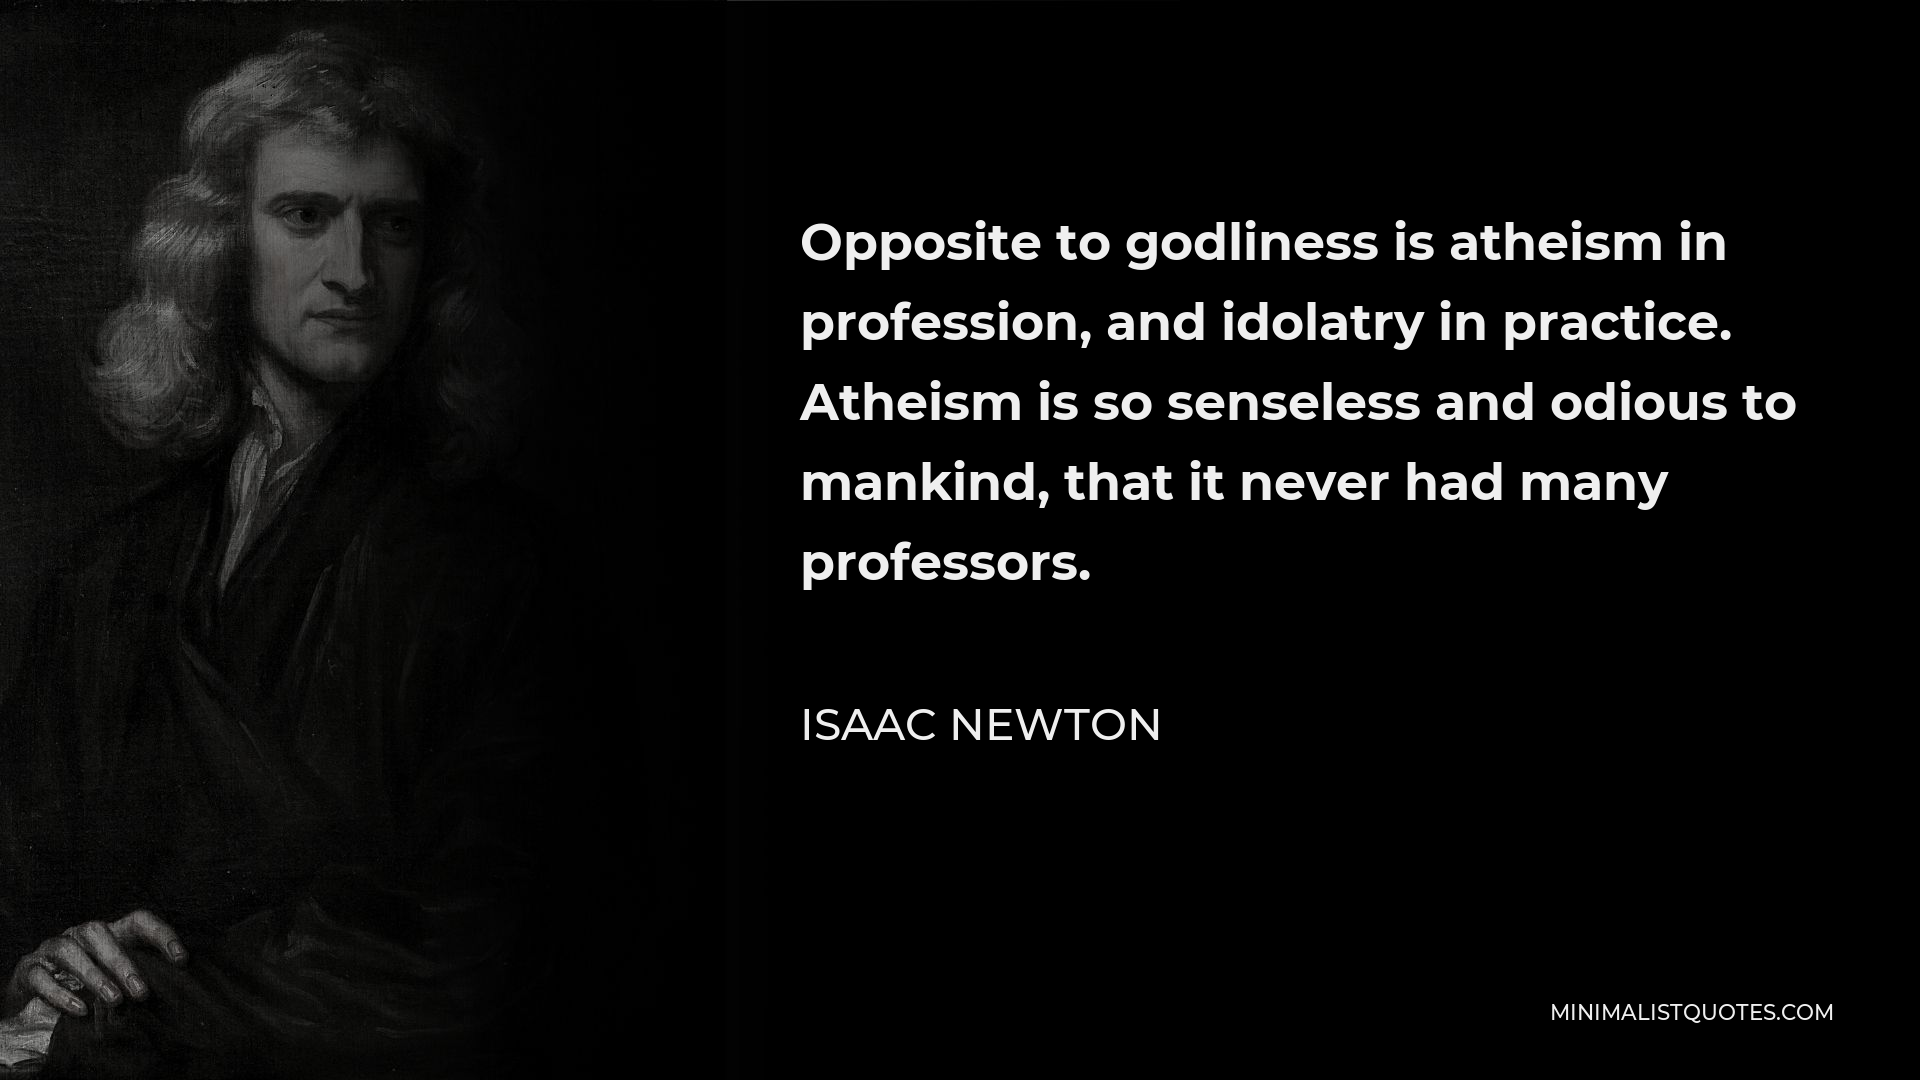 Isaac Newton Quote - Opposite to godliness is atheism in profession, and idolatry in practice. Atheism is so senseless and odious to mankind, that it never had many professors.